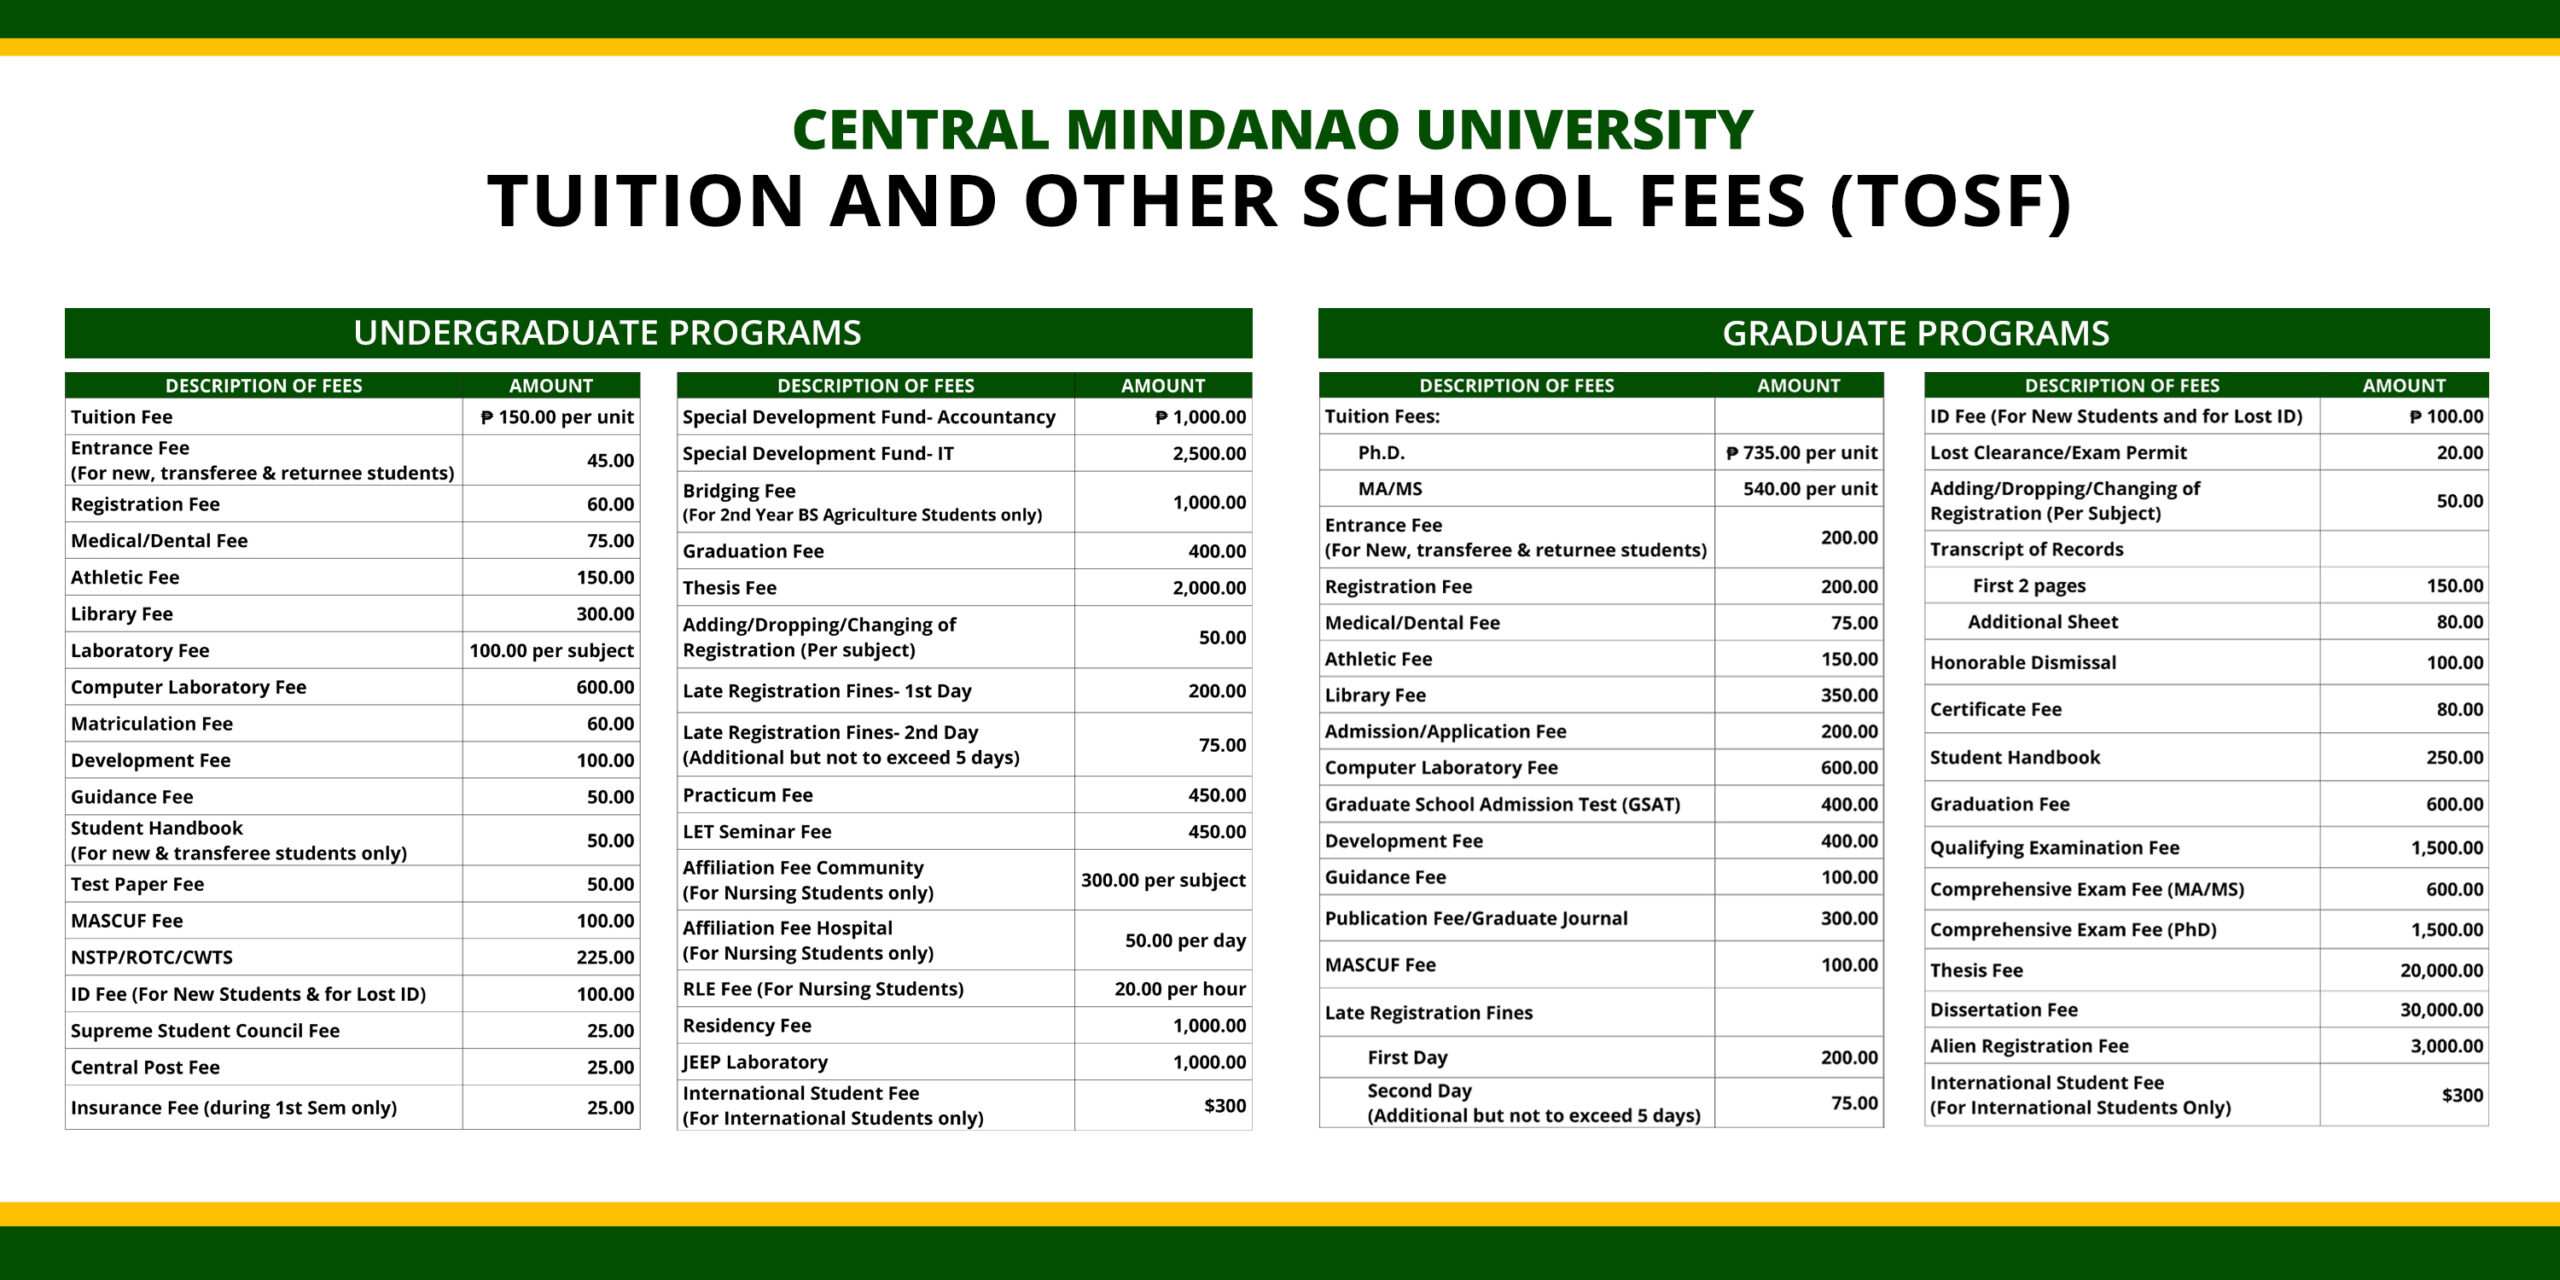 Central Mindanao University. University of Luxembourg Tuition fee. Tuition fee вопрос. California Baptist University Tuition fee.